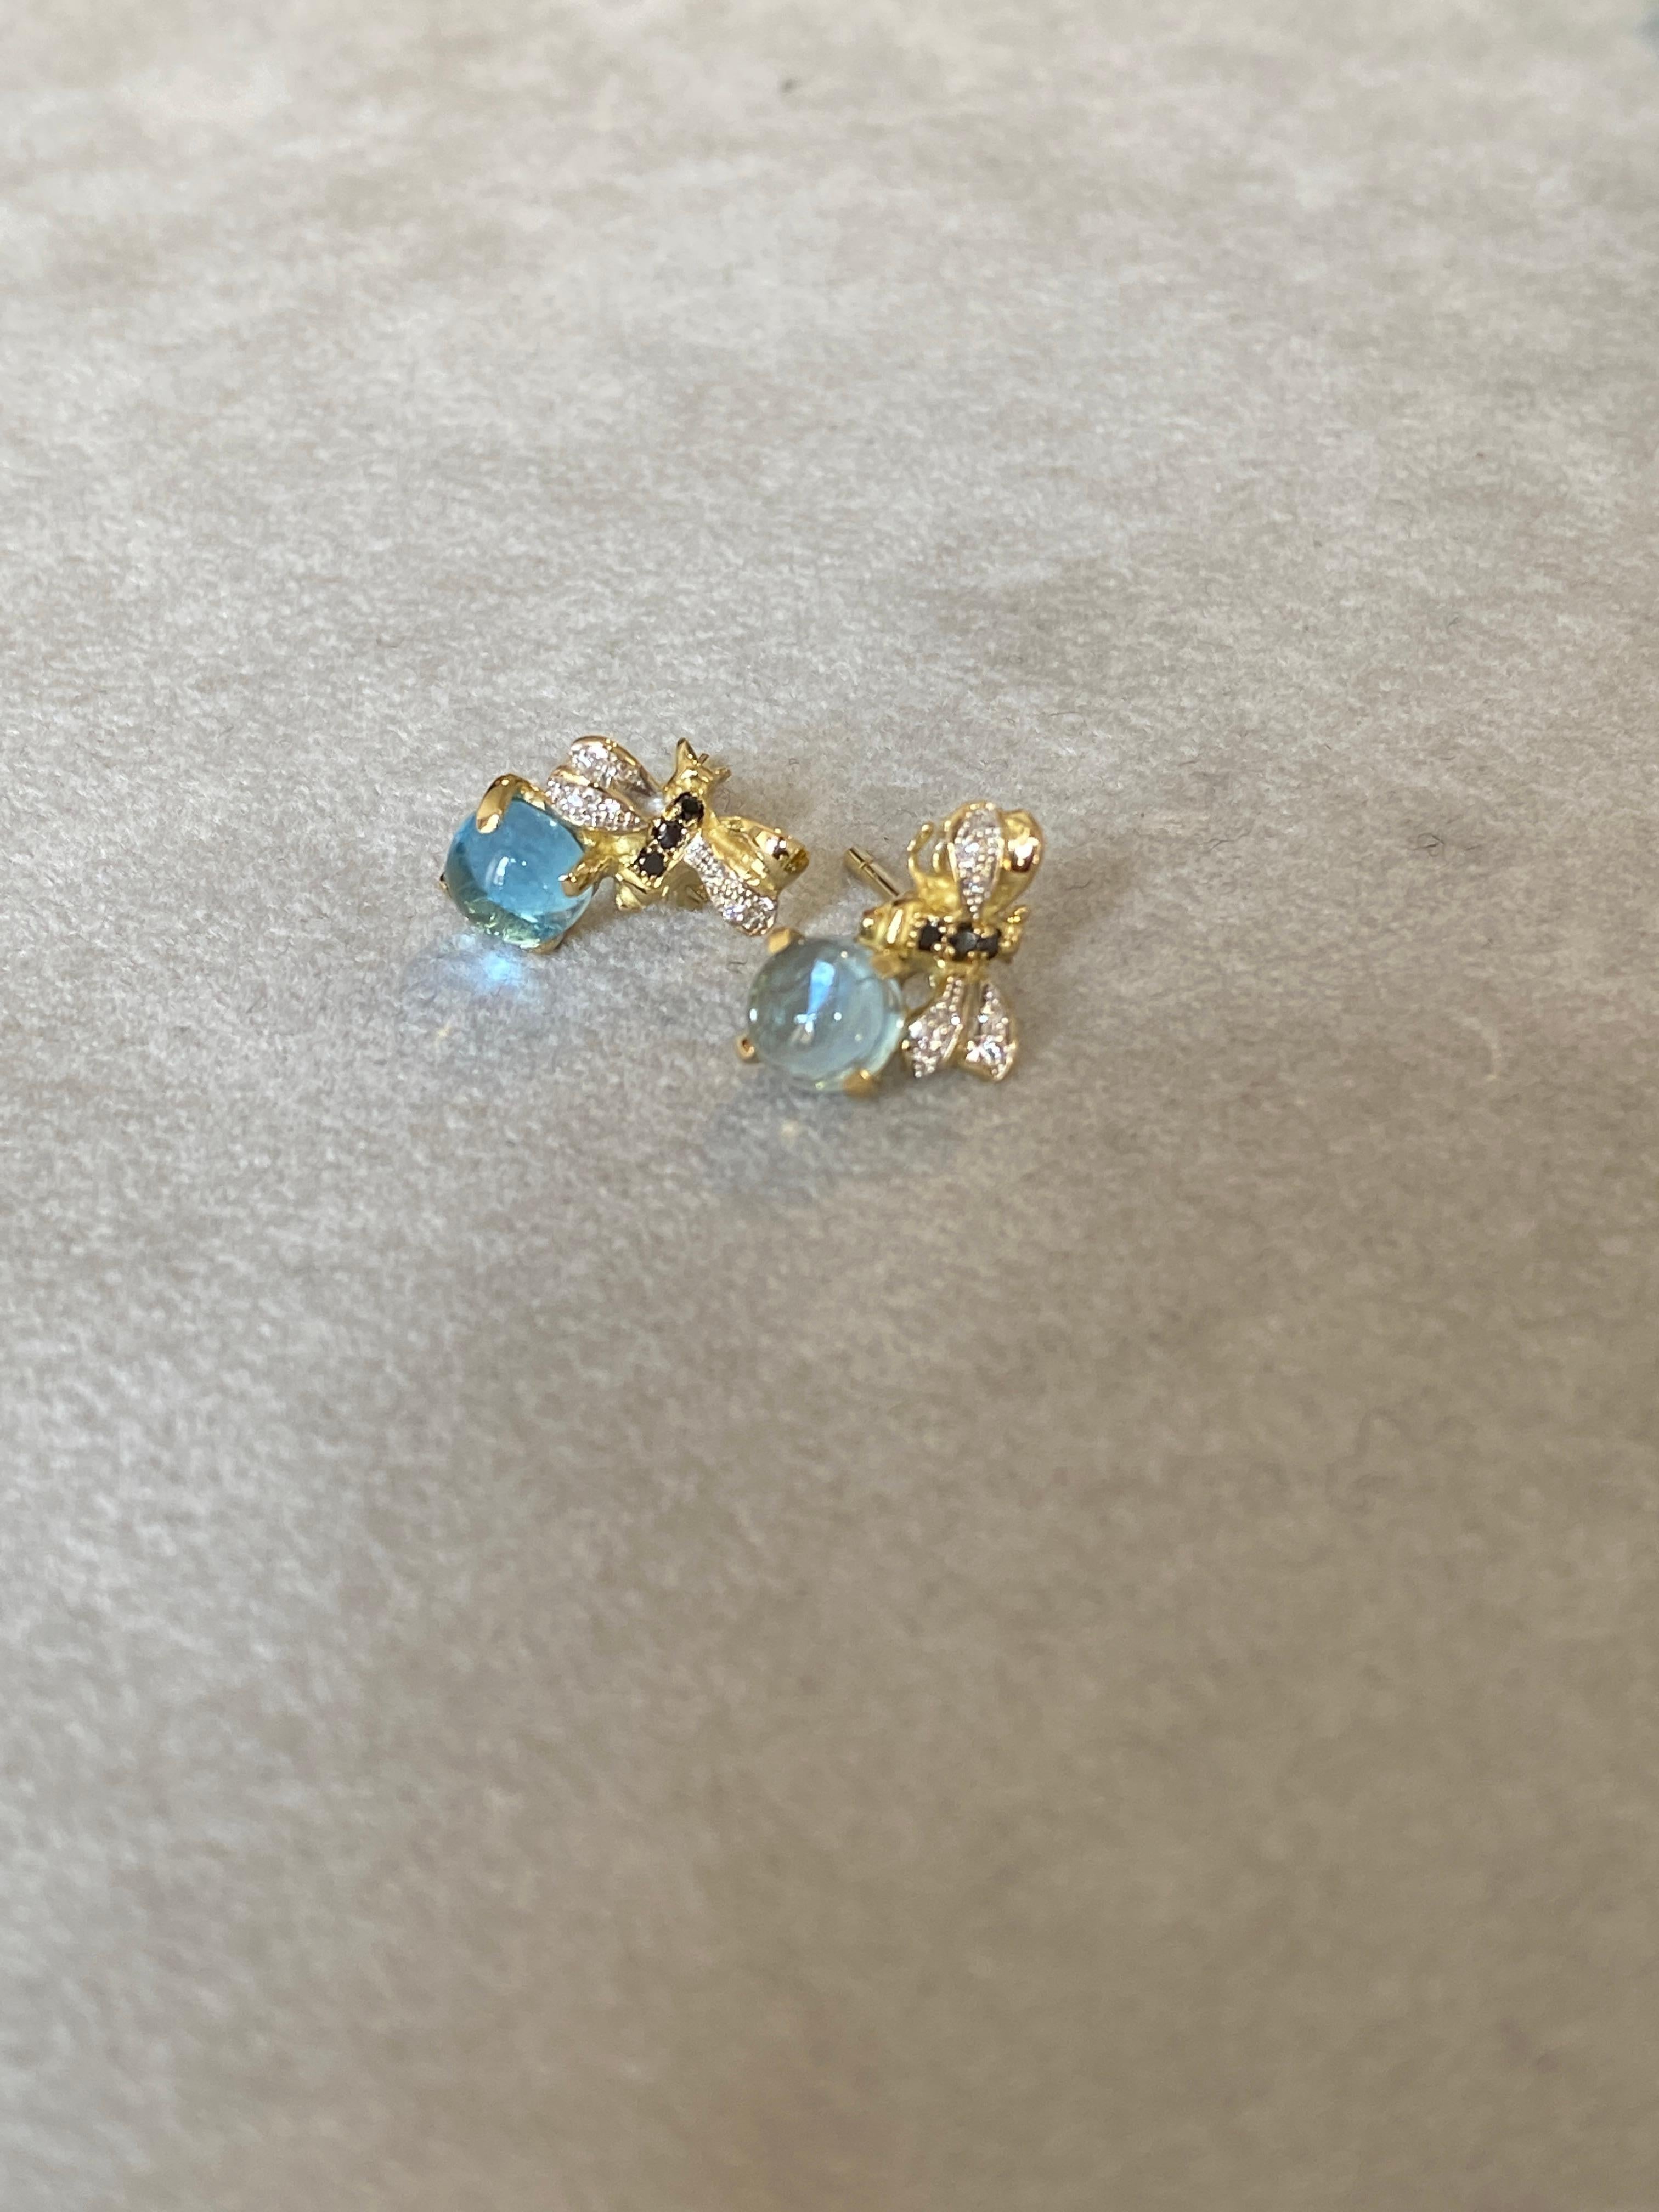 Rossella Ugolini Aquamarine 18K Gold Diamonds Bees Handcrafted Stud Earring In New Condition For Sale In Rome, IT